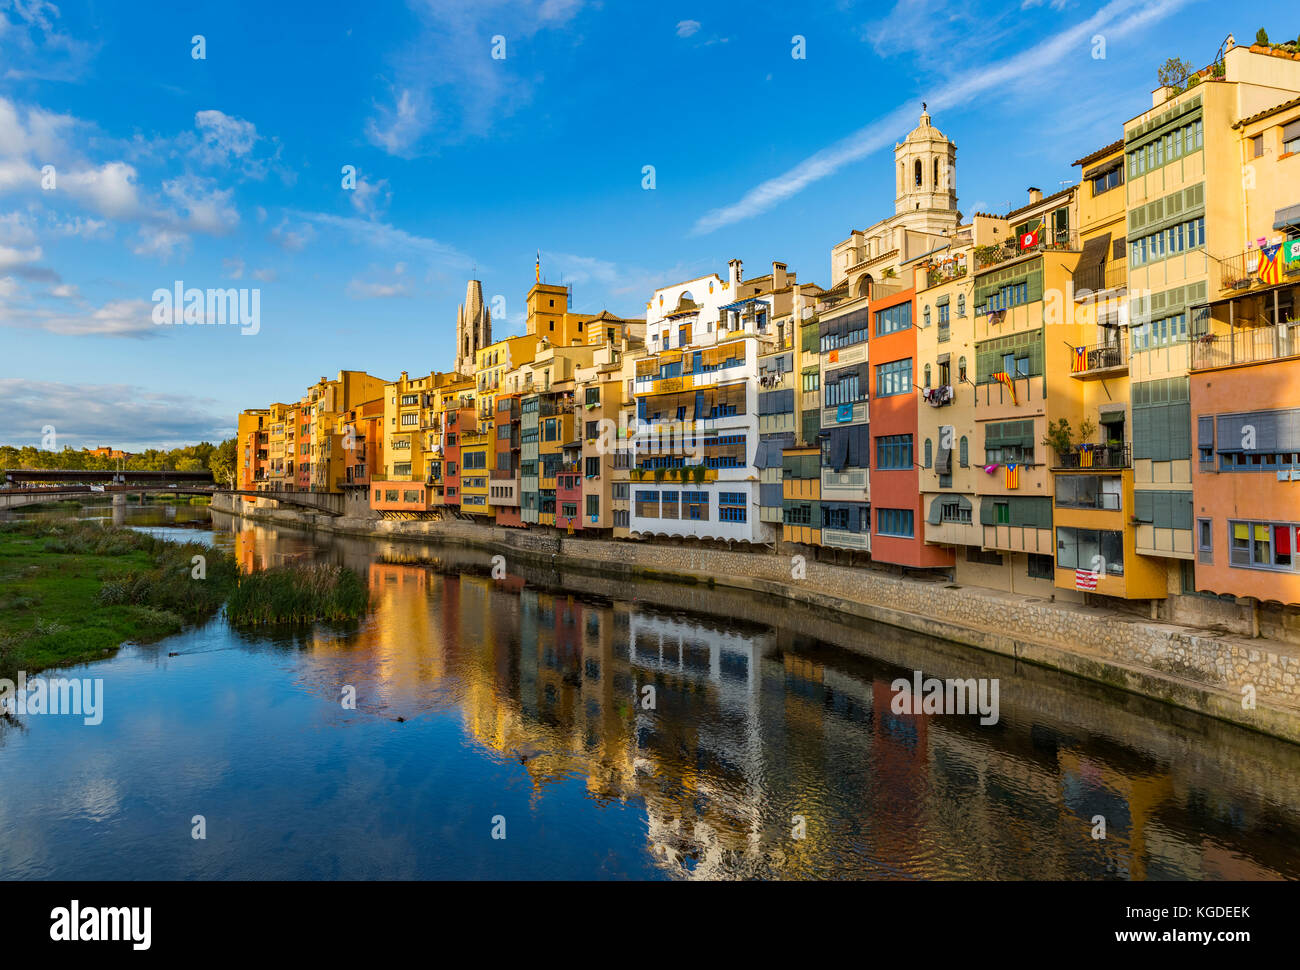 Case colorate sulle rive del fiume Onyar in Girona Foto Stock